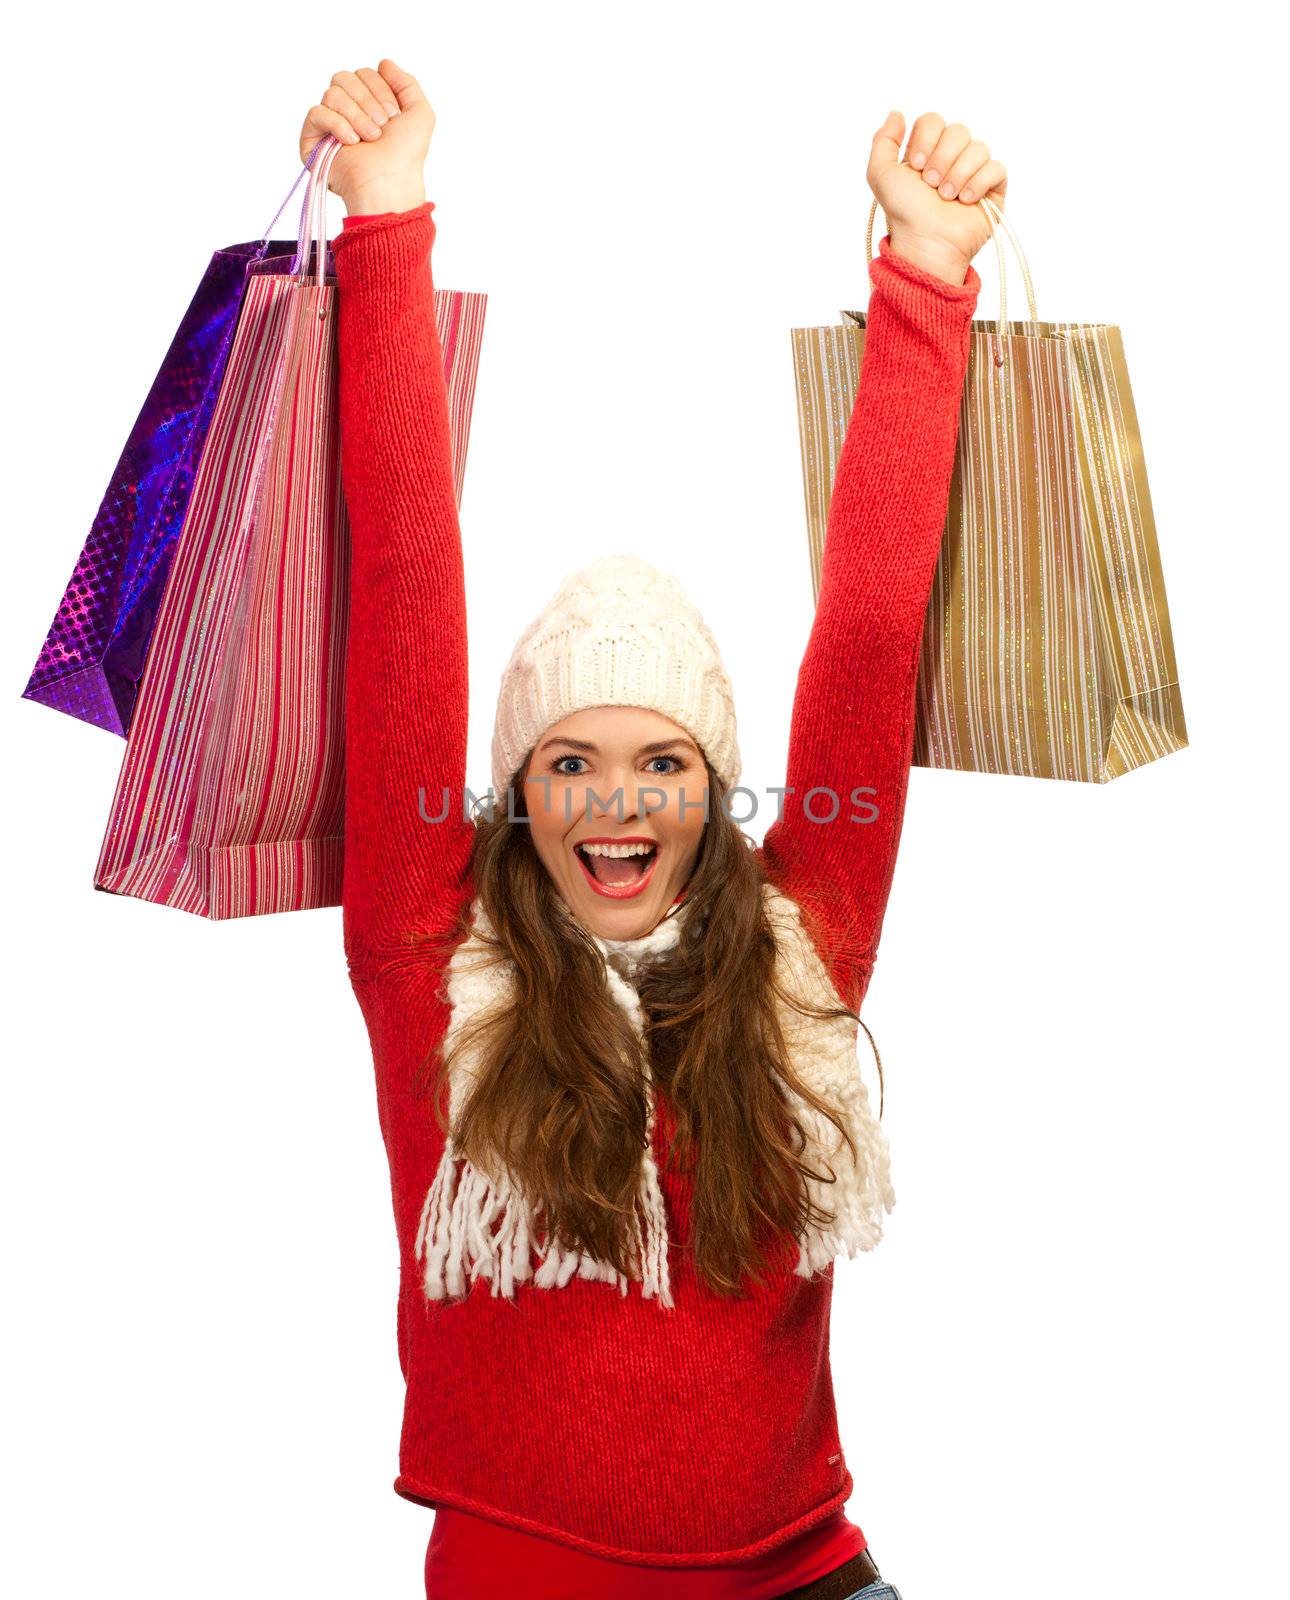 A beautiful young woman out shopping is thrilled to find the perfect christmas gift